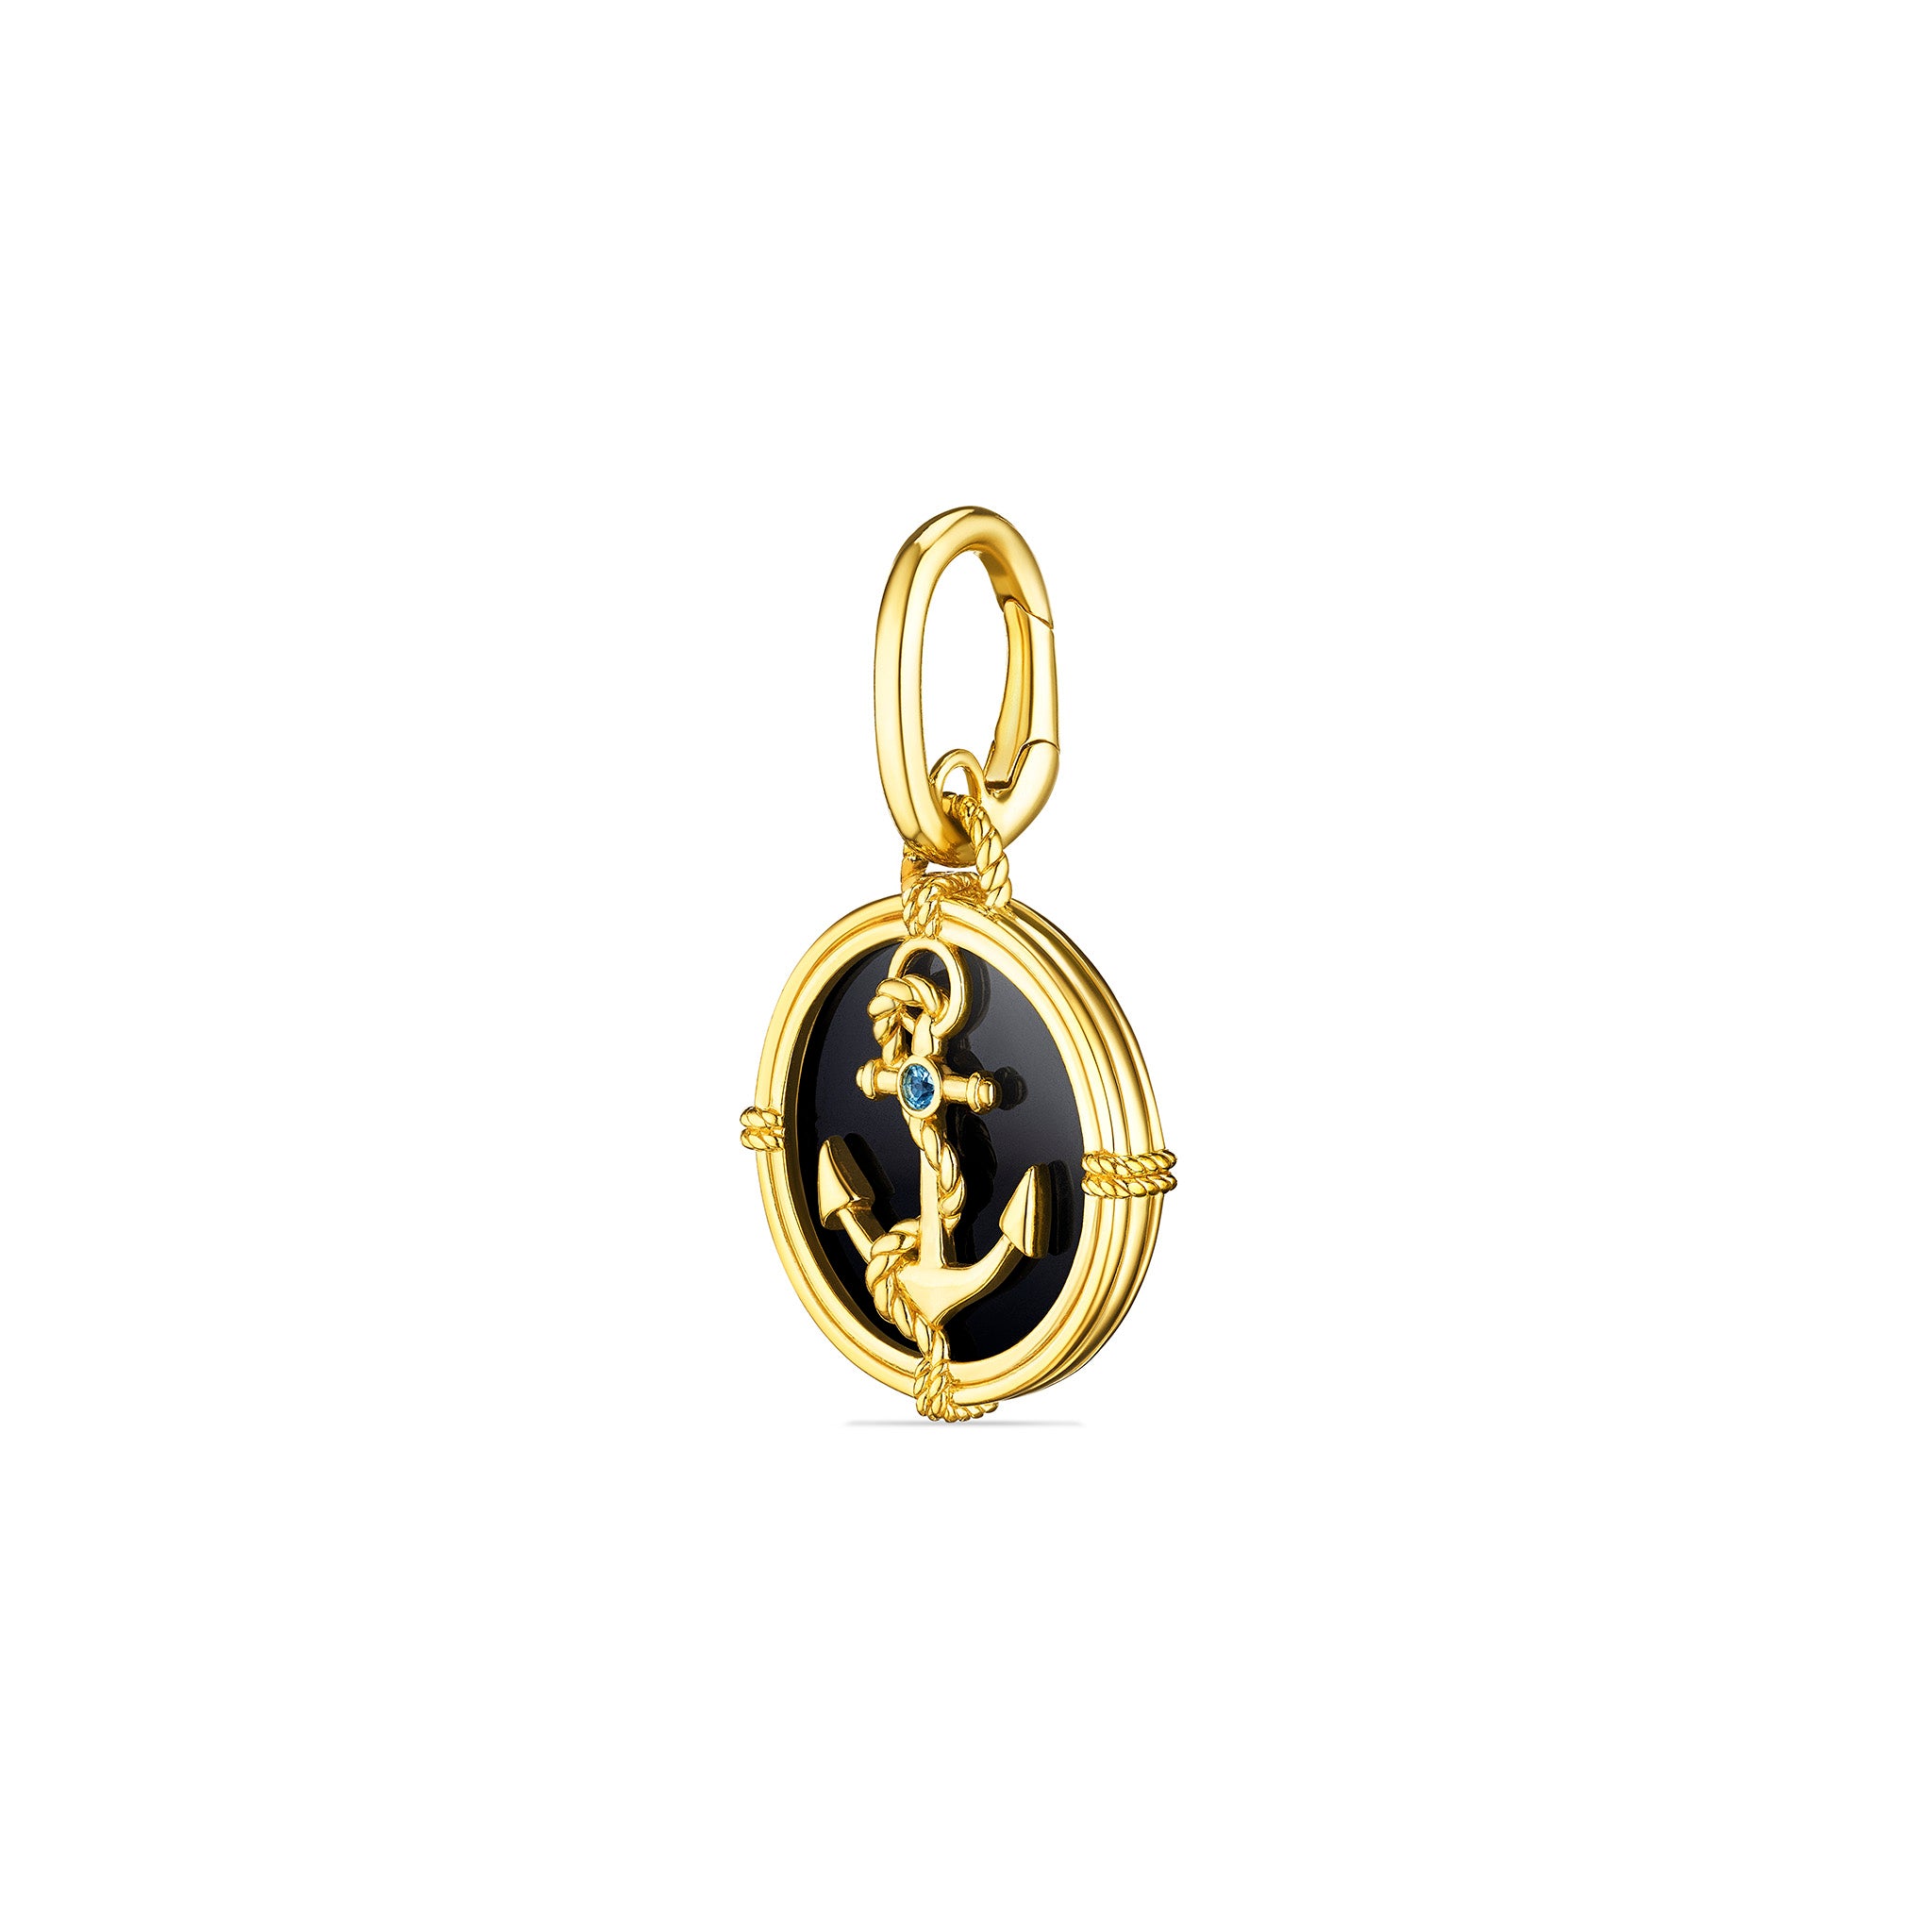 Ocean Reef Anchor Medallion with Black Onyx and Blue Topaz in 18K Gold Vermeil